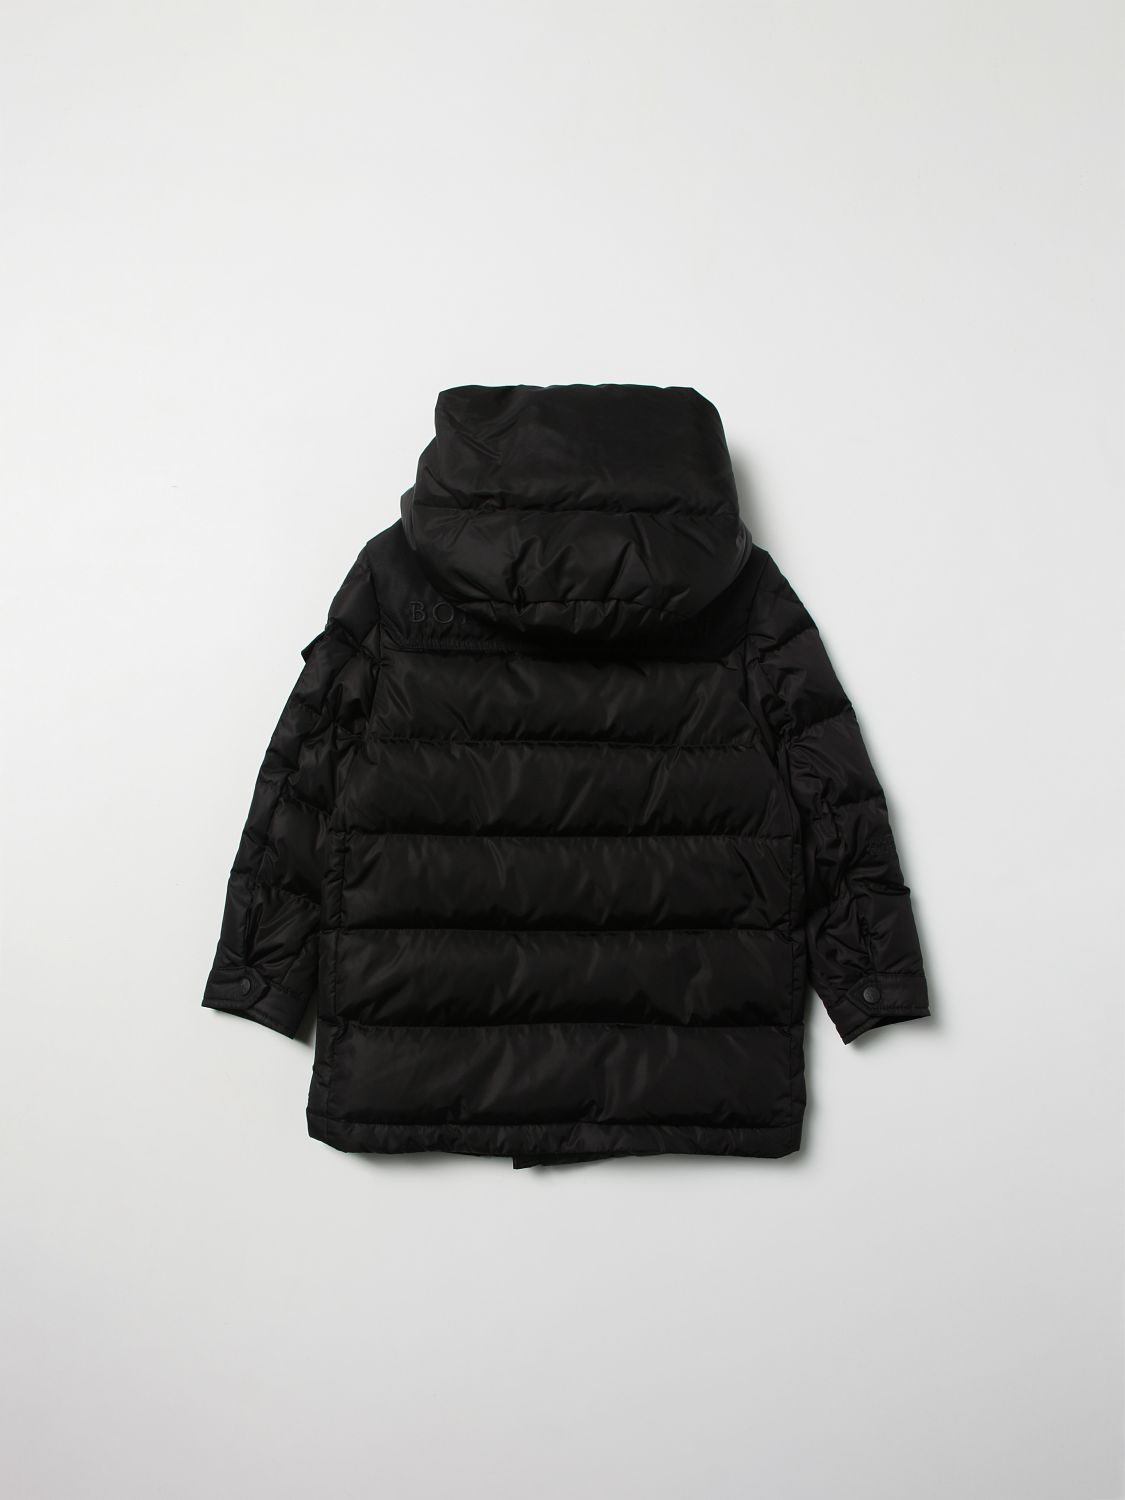 Jacket Moncler: Moncler Born To Protect parka with hood black 2